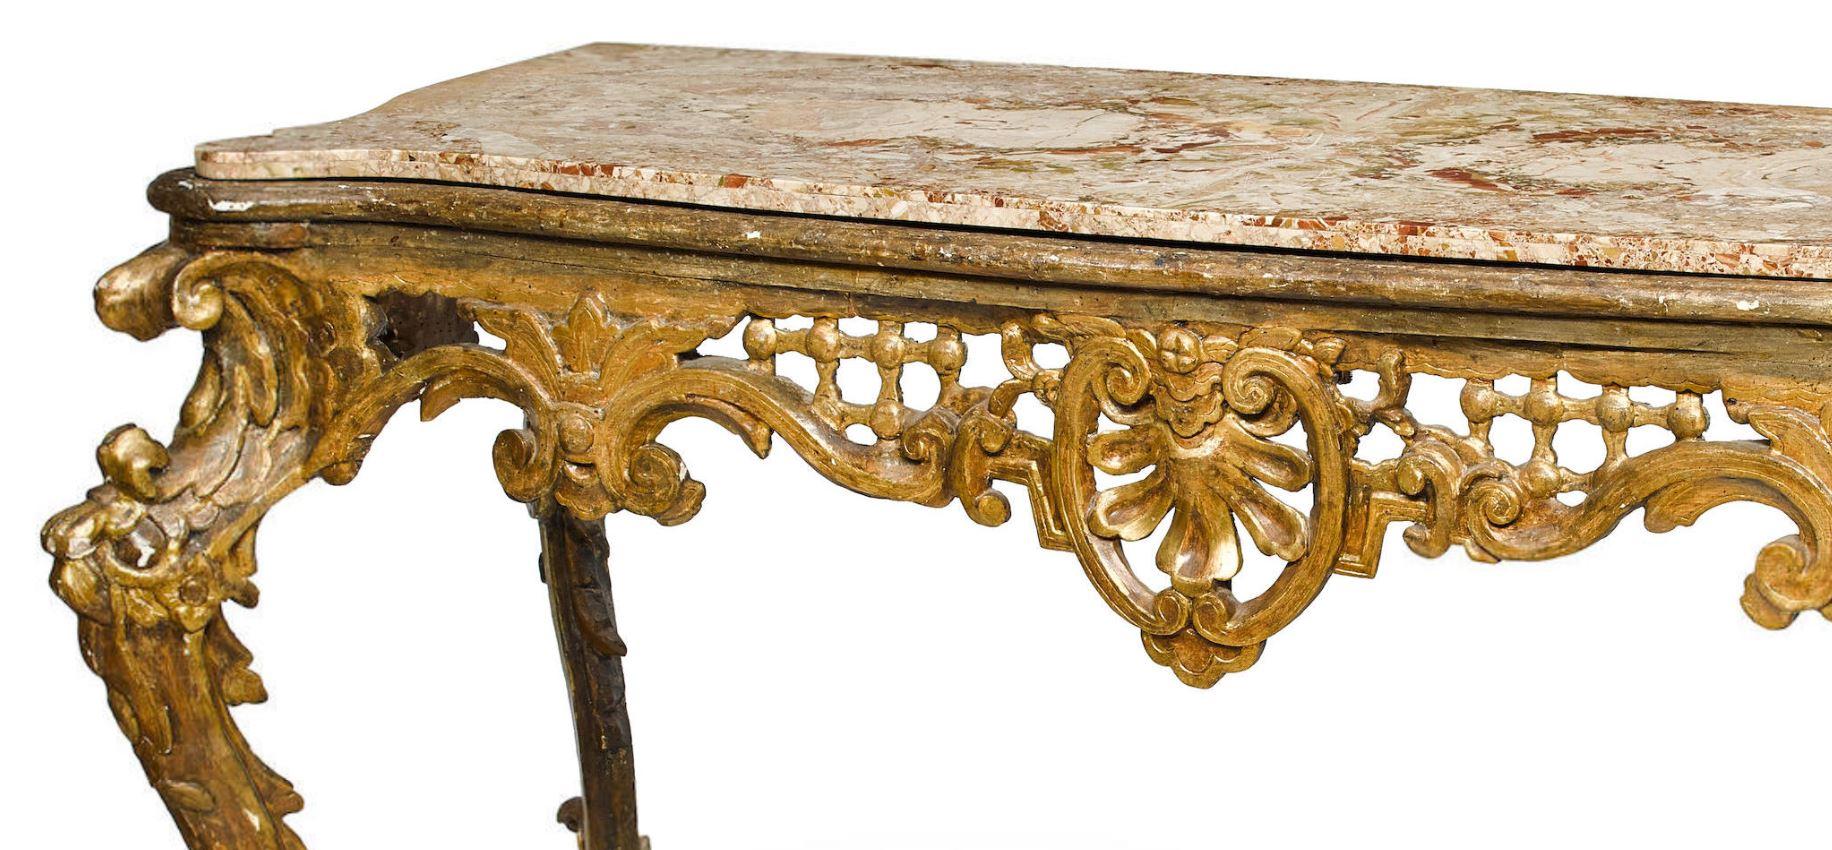 Impressive 18th century Italian Rococo hand-carved giltwood console.
The inset serpentine-fronted marble top is over carved giltwood frieze with Rocaille motif fretwork centred by two C-scrolls with a shell, supported by reversed scroll legs